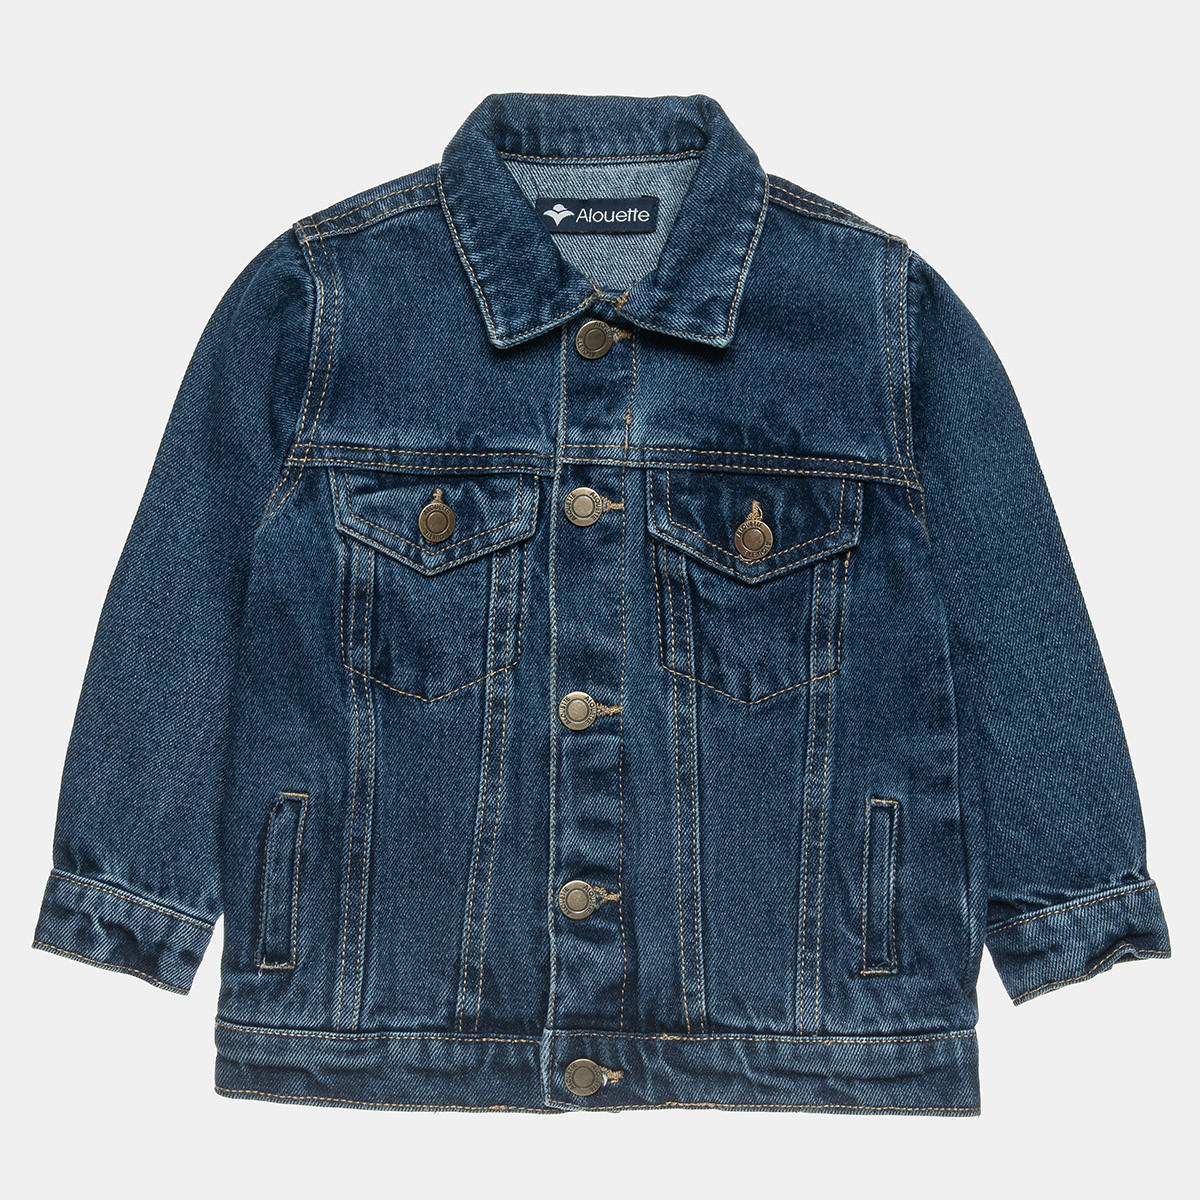 Gender-Neutral Cotton Non-Stretch Jean Jacket For Kids Old, 60% OFF